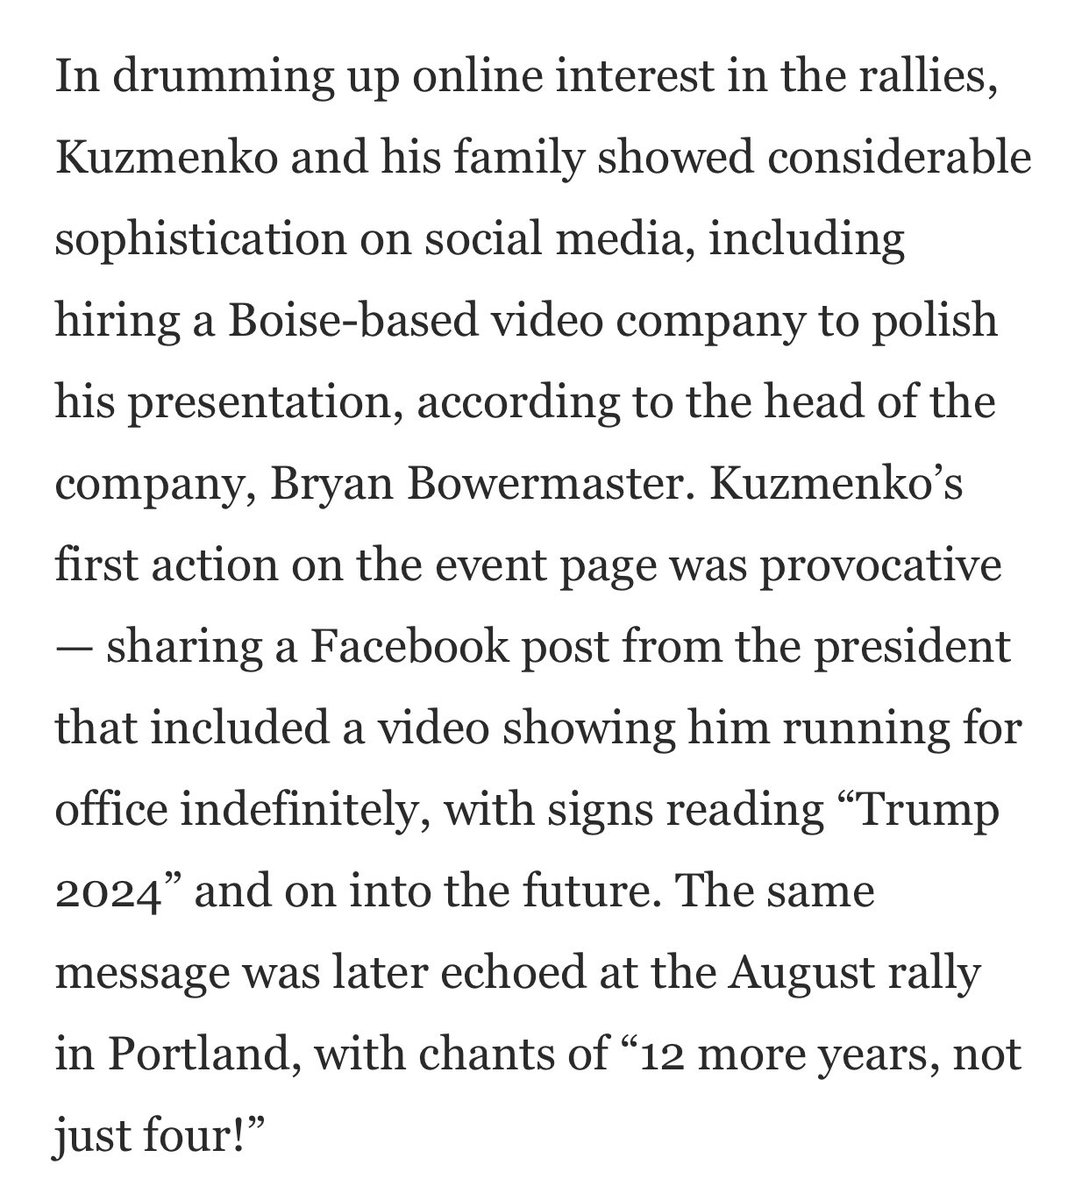 The former Soviet family who organized the extremely divisive Portland event - which inflamed American divisions, and caused weeks of controversy and the death of an American - showed “considerable sophistication,” in doing so.CAN OUR MEDIA PLEASE START TALKING ABOUT THIS NOW?!